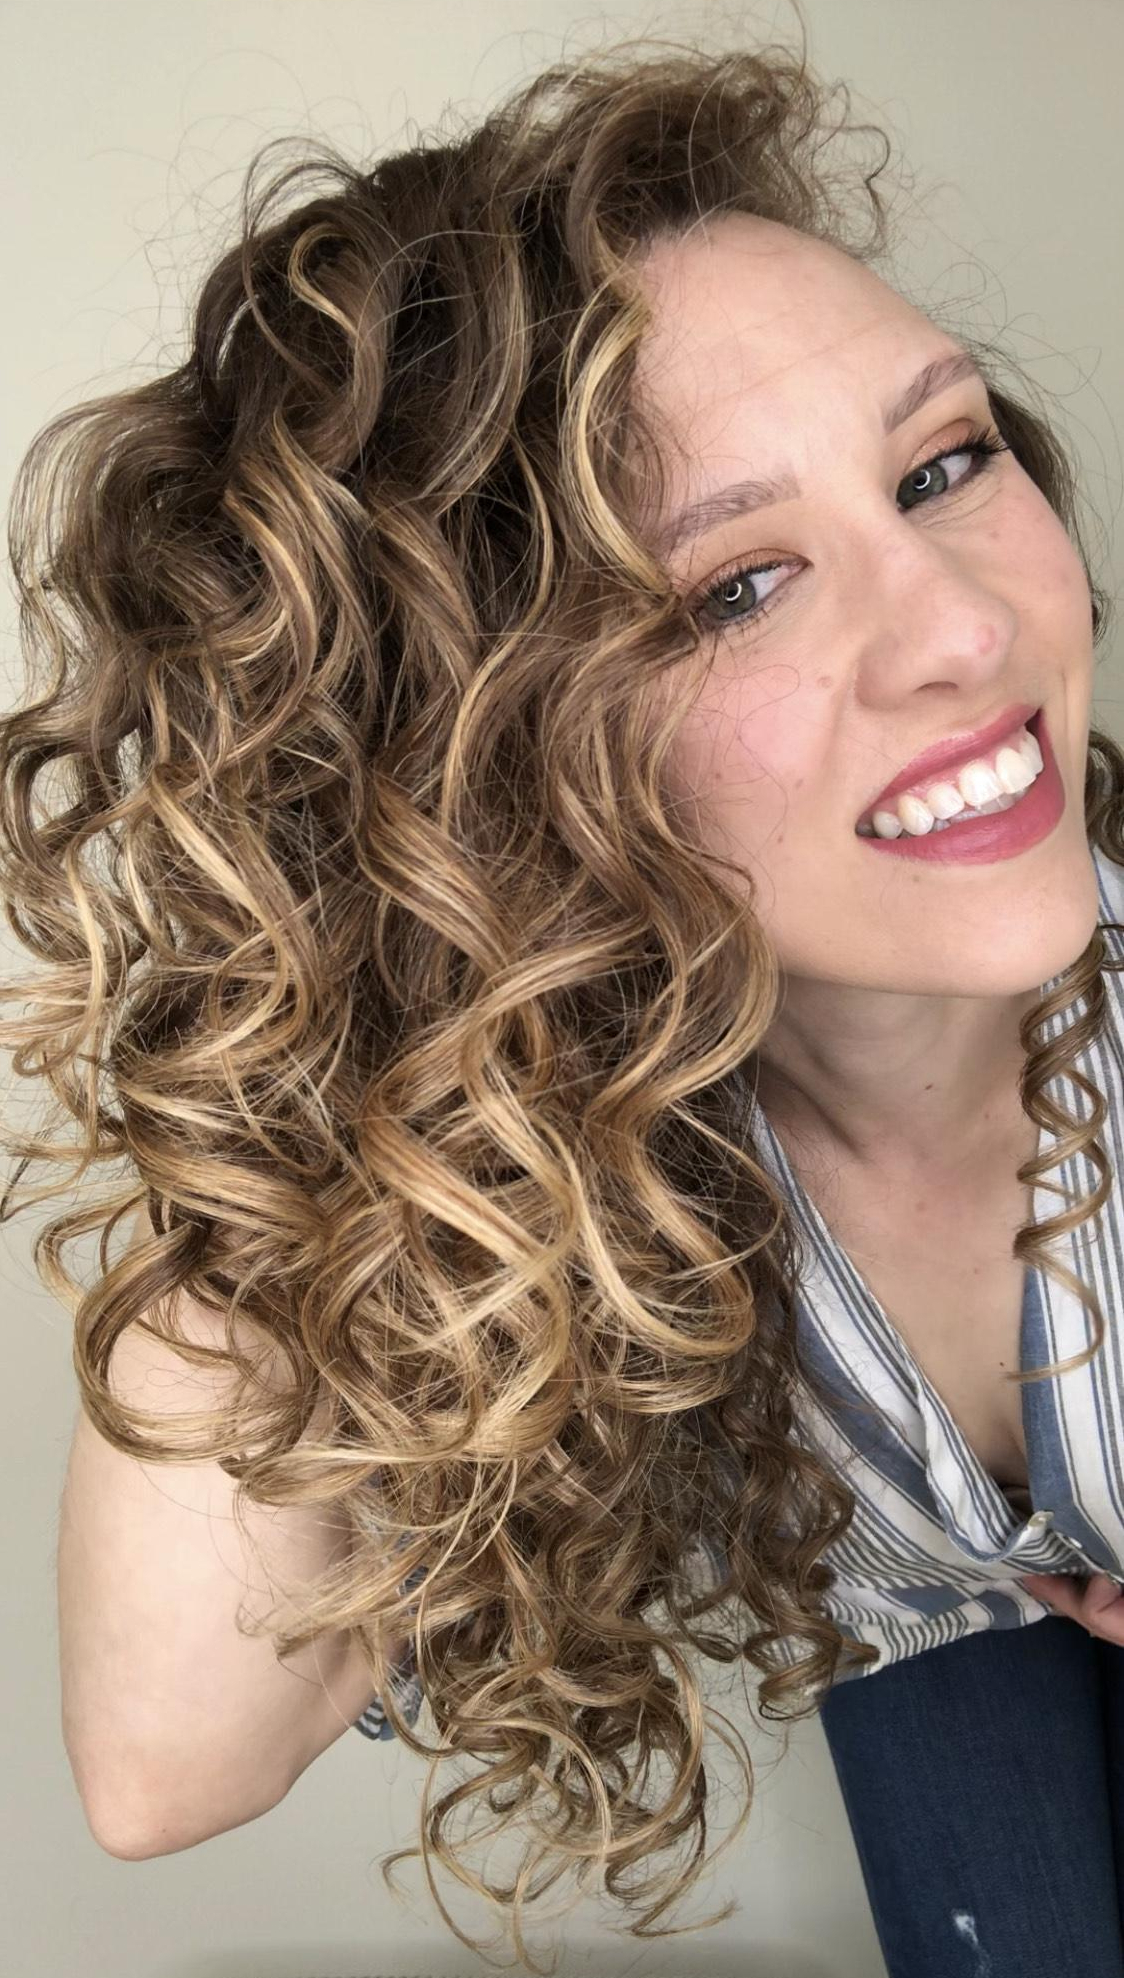 10 Combs and Brushes for Curly Hair with Tips on How to Use Them